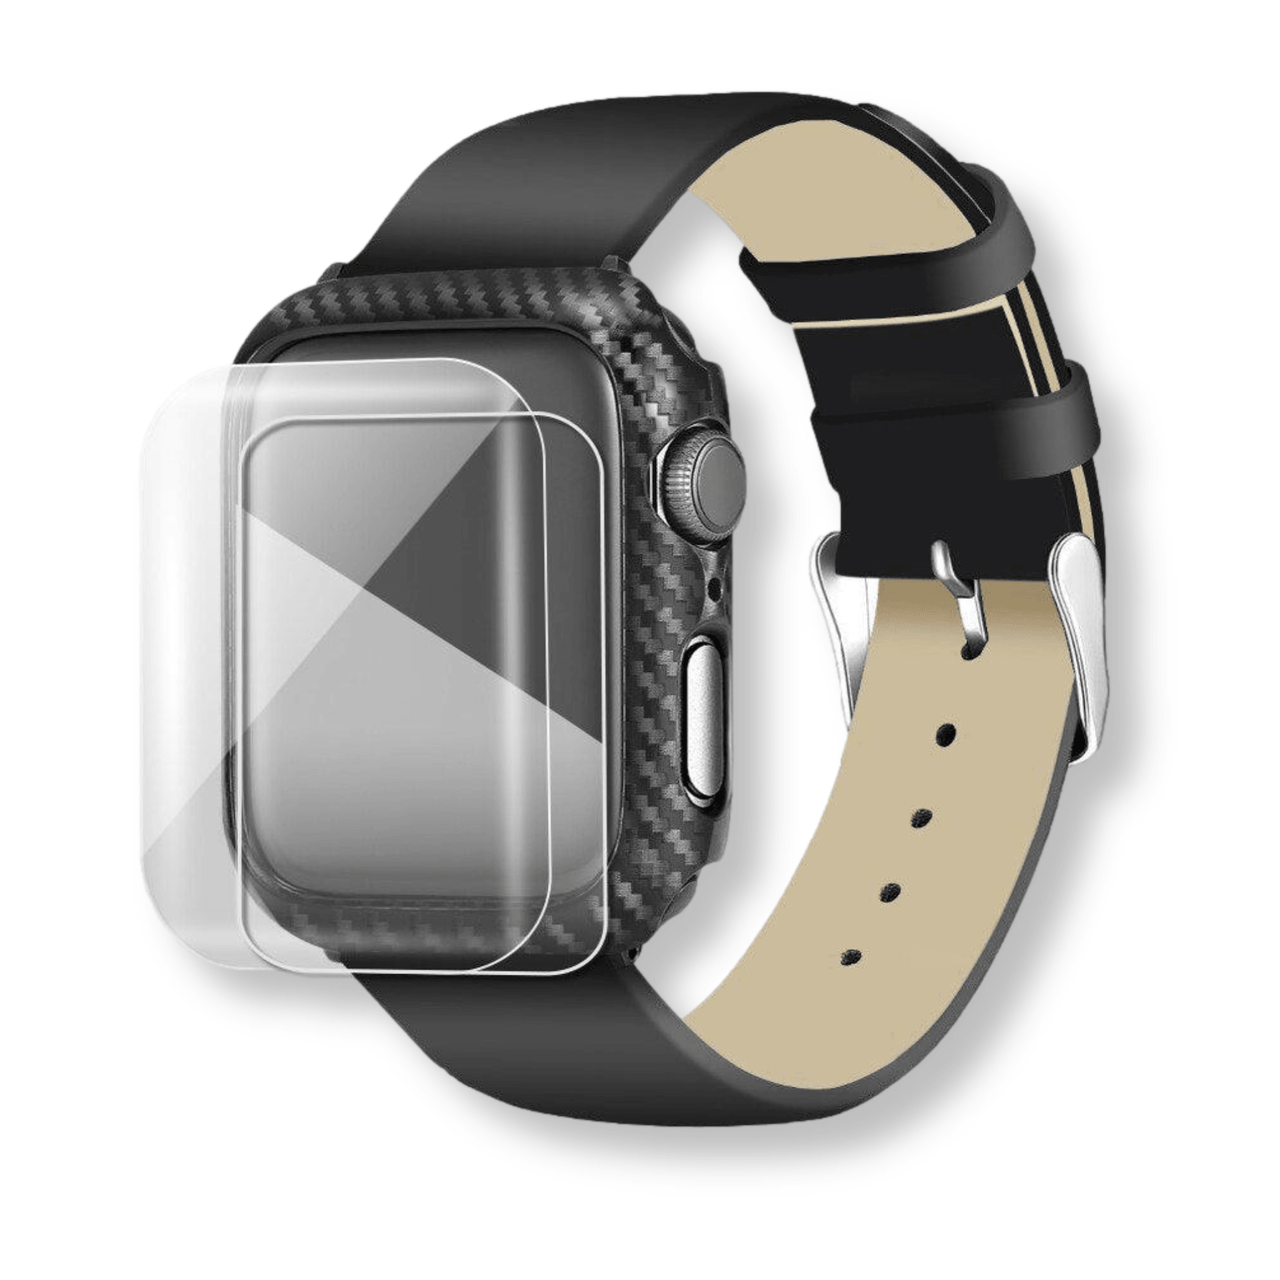 Cover Case and glass screen For Apple Watch - watchband.direct